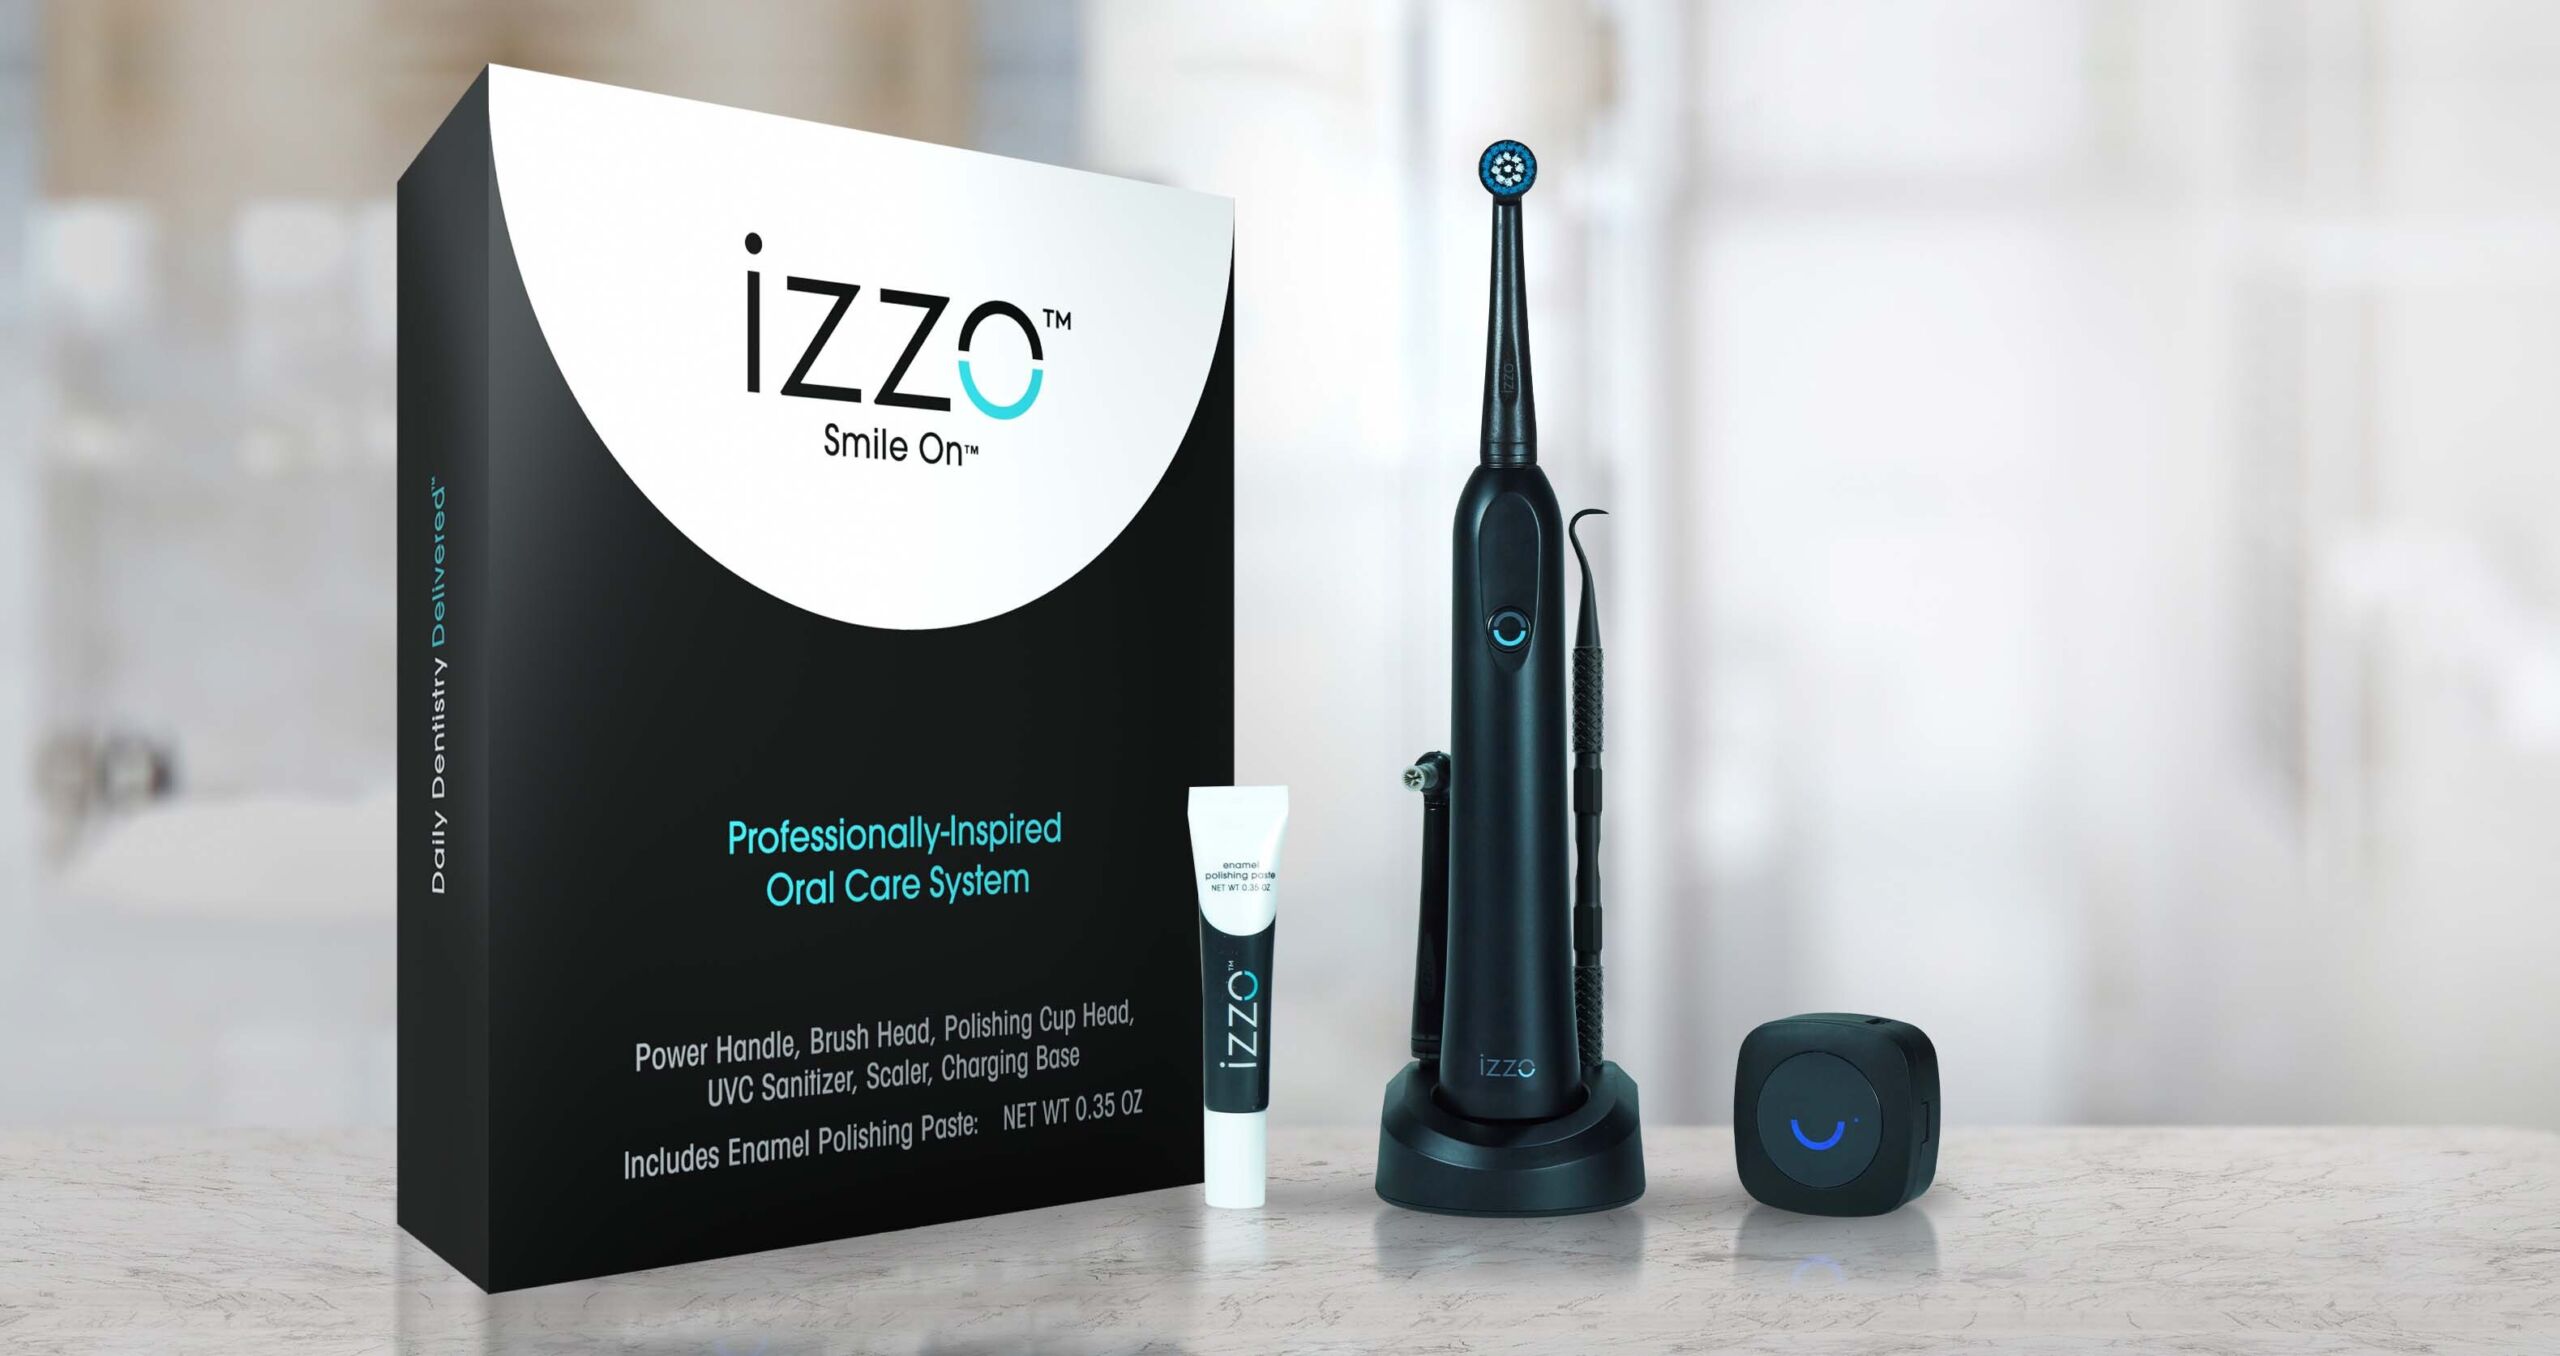 izzo - A REVOLUTIONARY 4-IN-1 ORAL CARE SYSTEM FOR AT-HOME USE